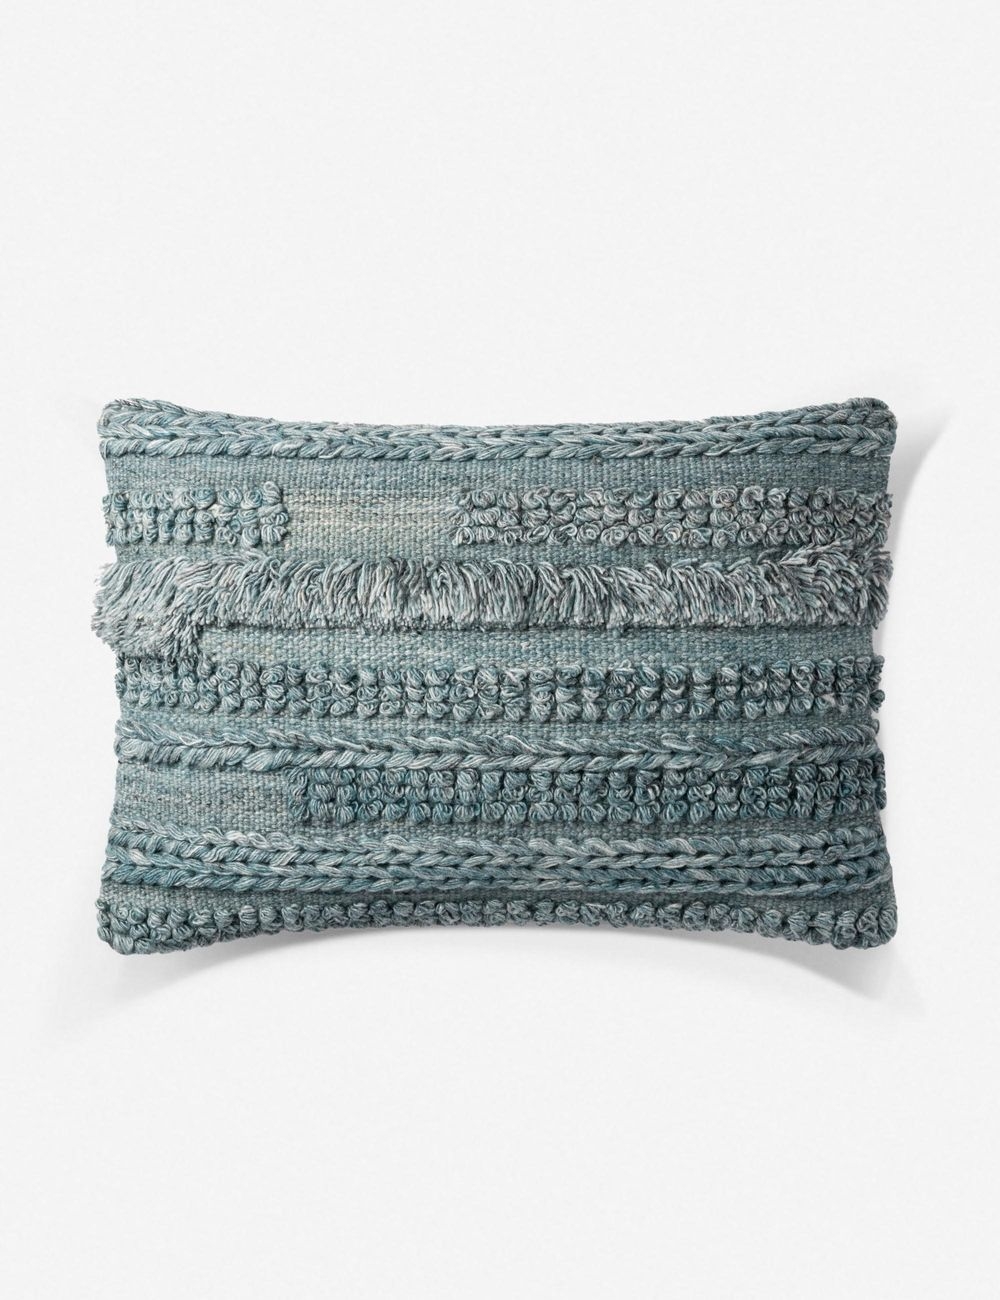 Nazare Lumbar Pillow, Blue, ED Ellen DeGeneres Crafted by Loloi - Image 0